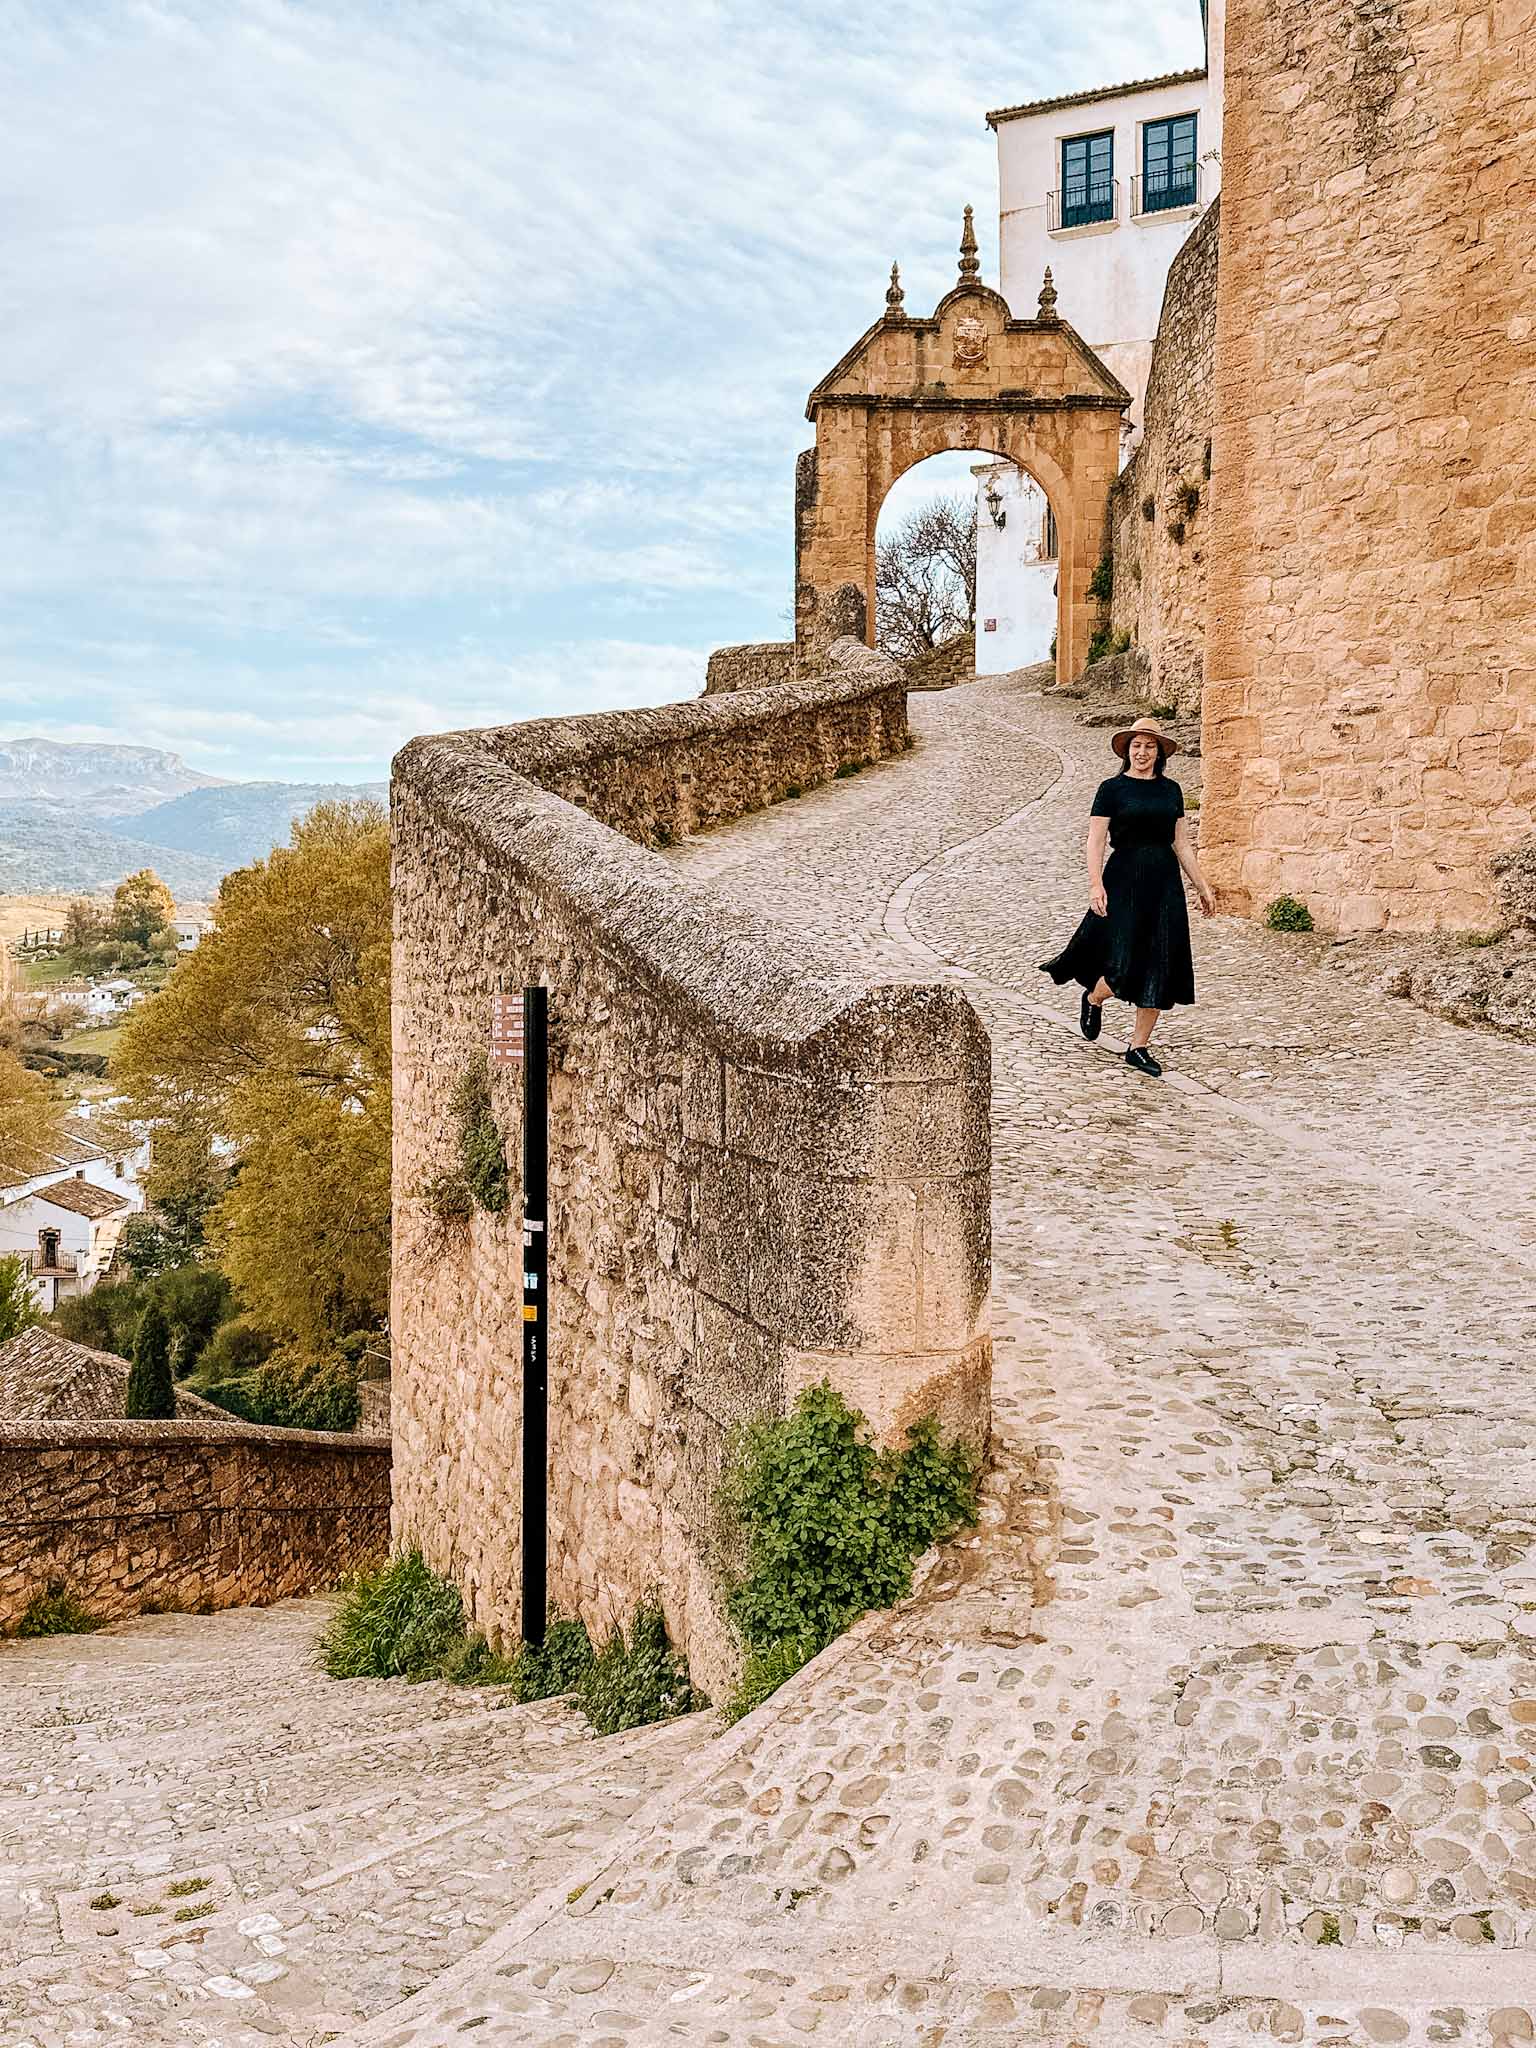 Hidden gems and unique things to see in Ronda, Spain